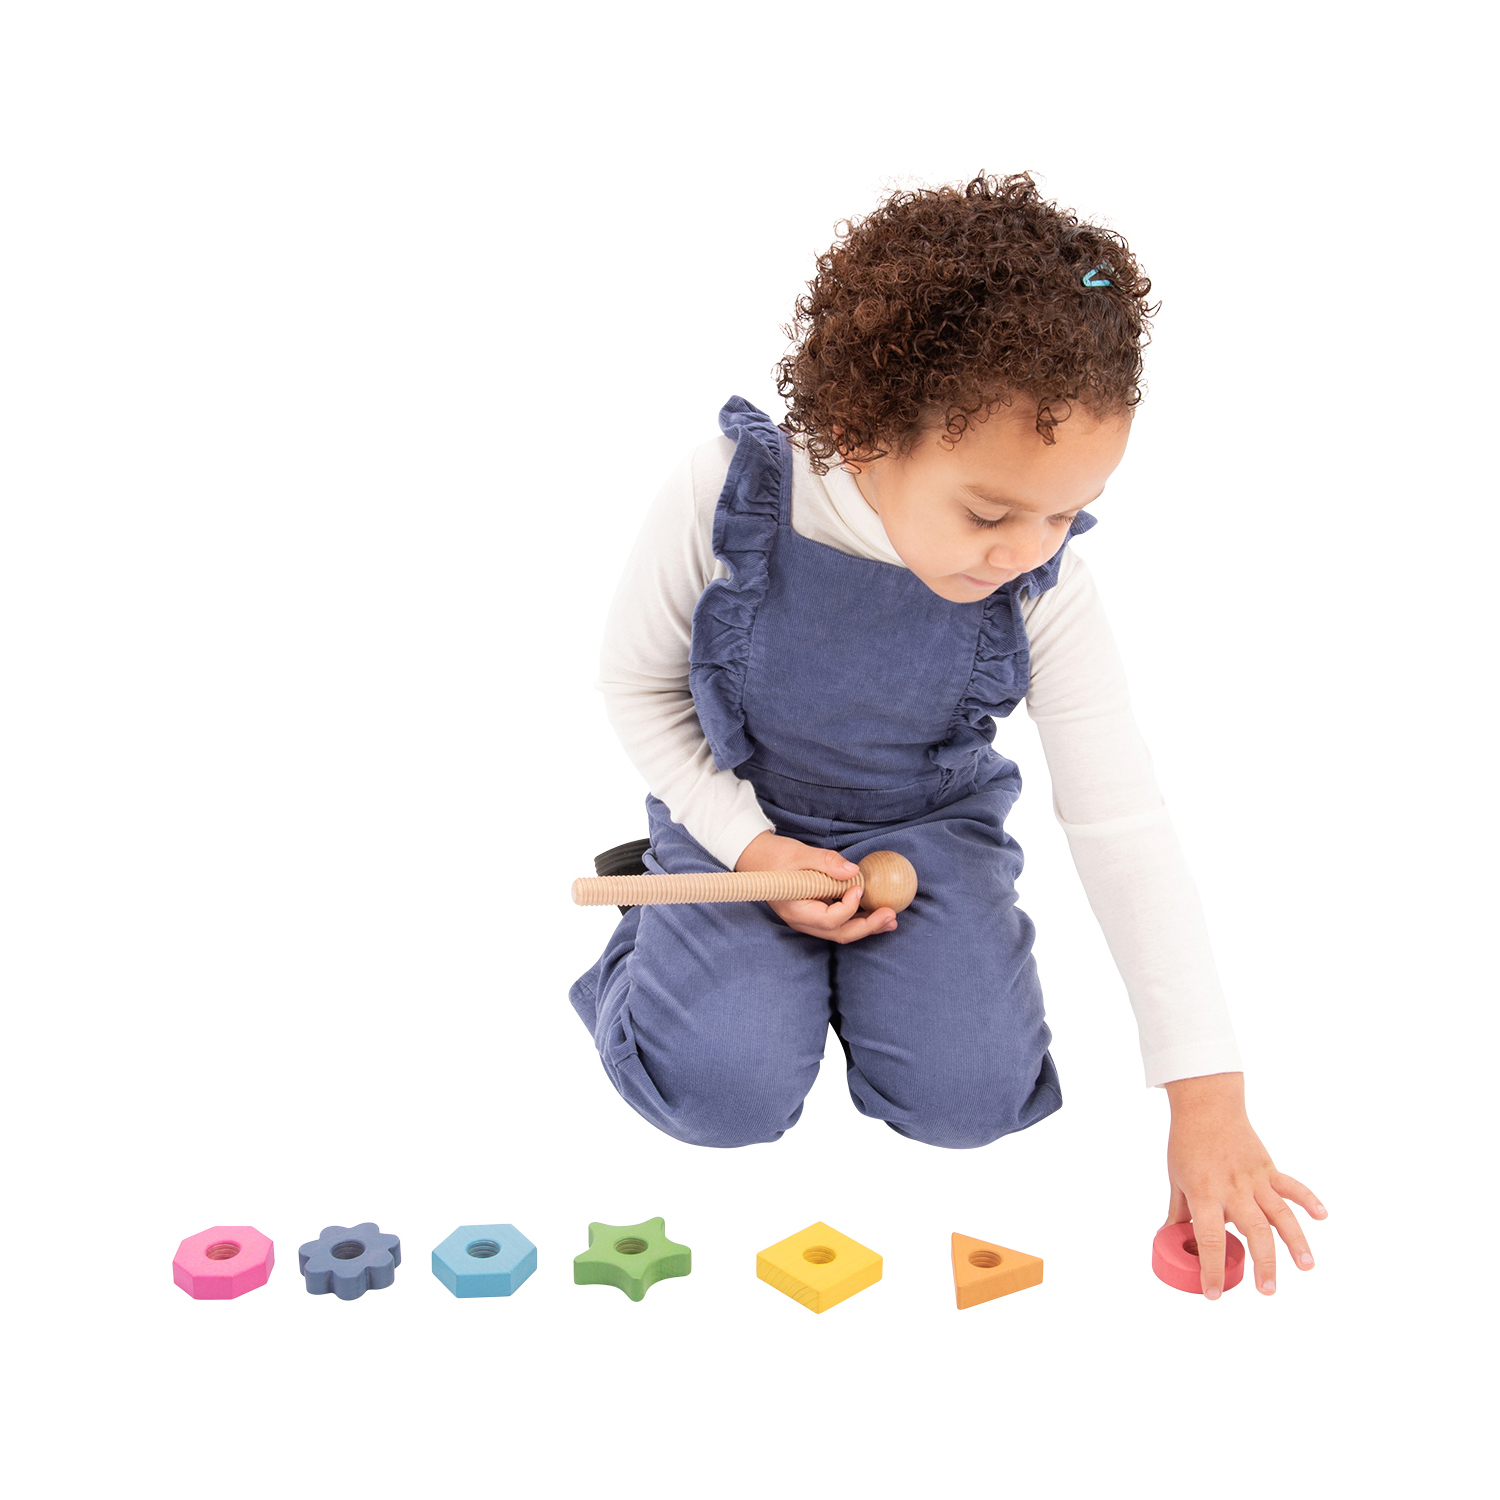 TickiT Rainbow Wooden Shape Twister - 7 Shapes and Colors image number null